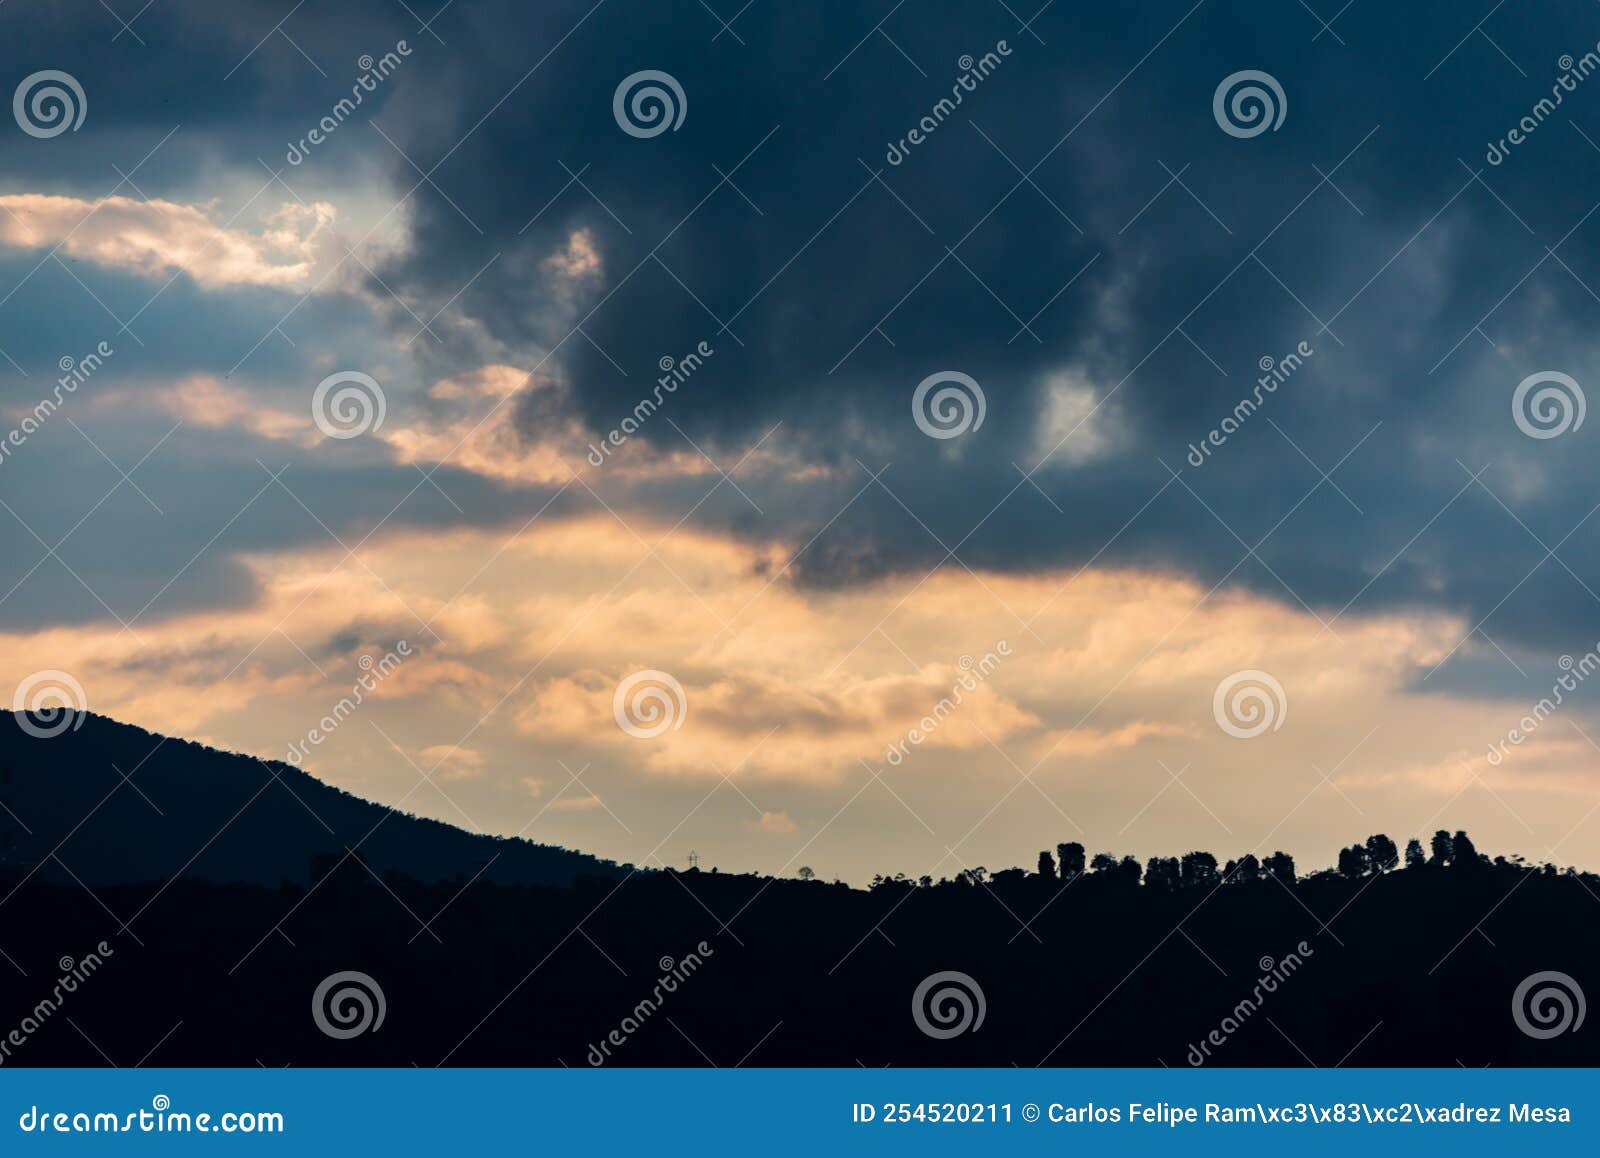 landscape with mountains and sky with stromy clouds